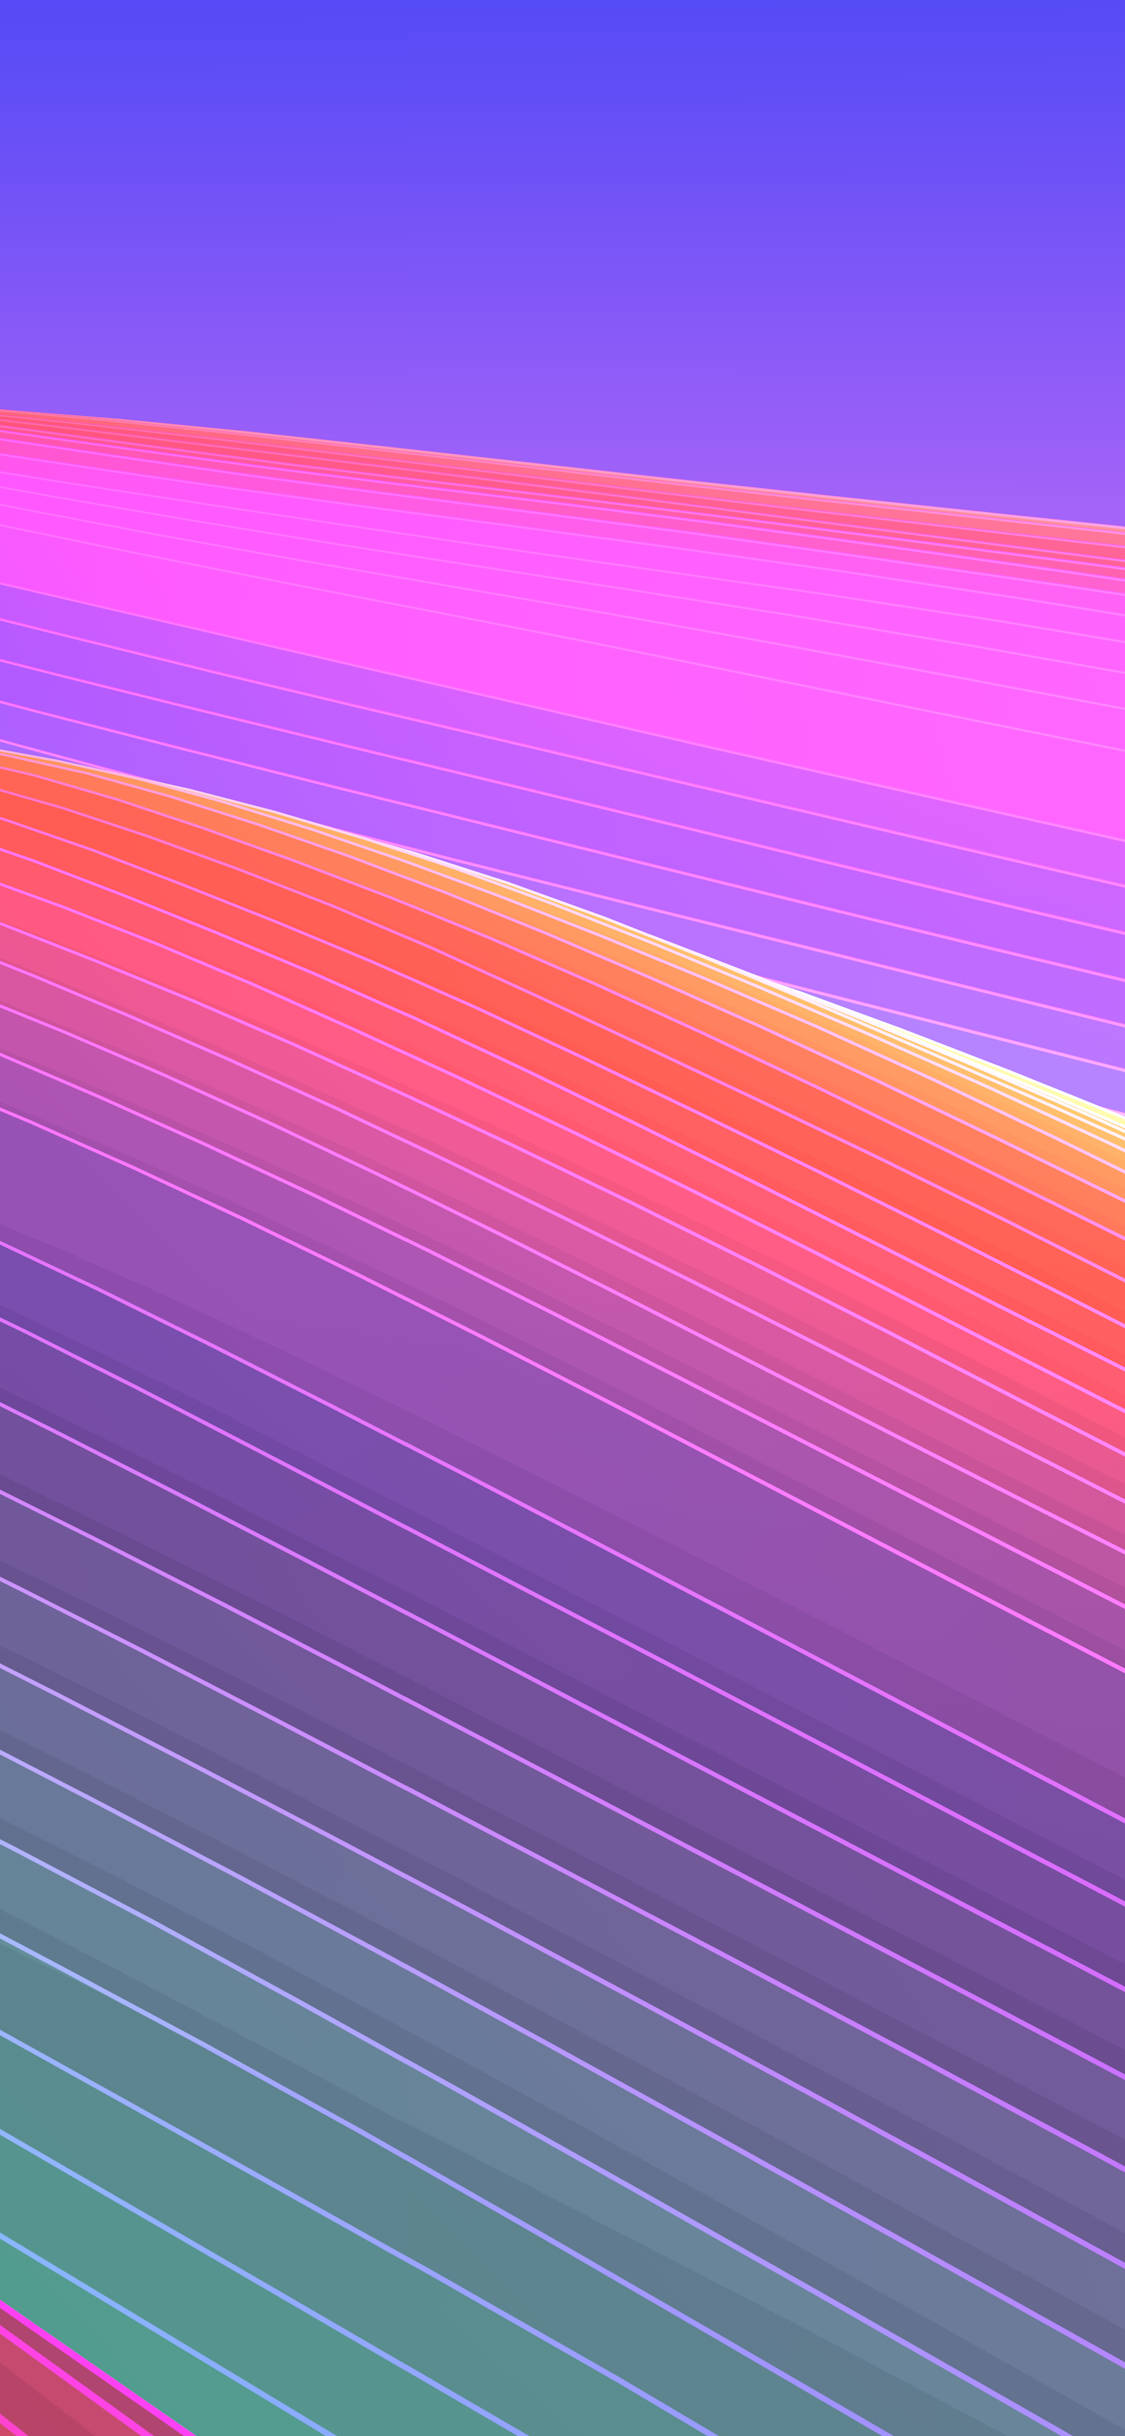 A Colorful Abstract Image Of A Wave Background